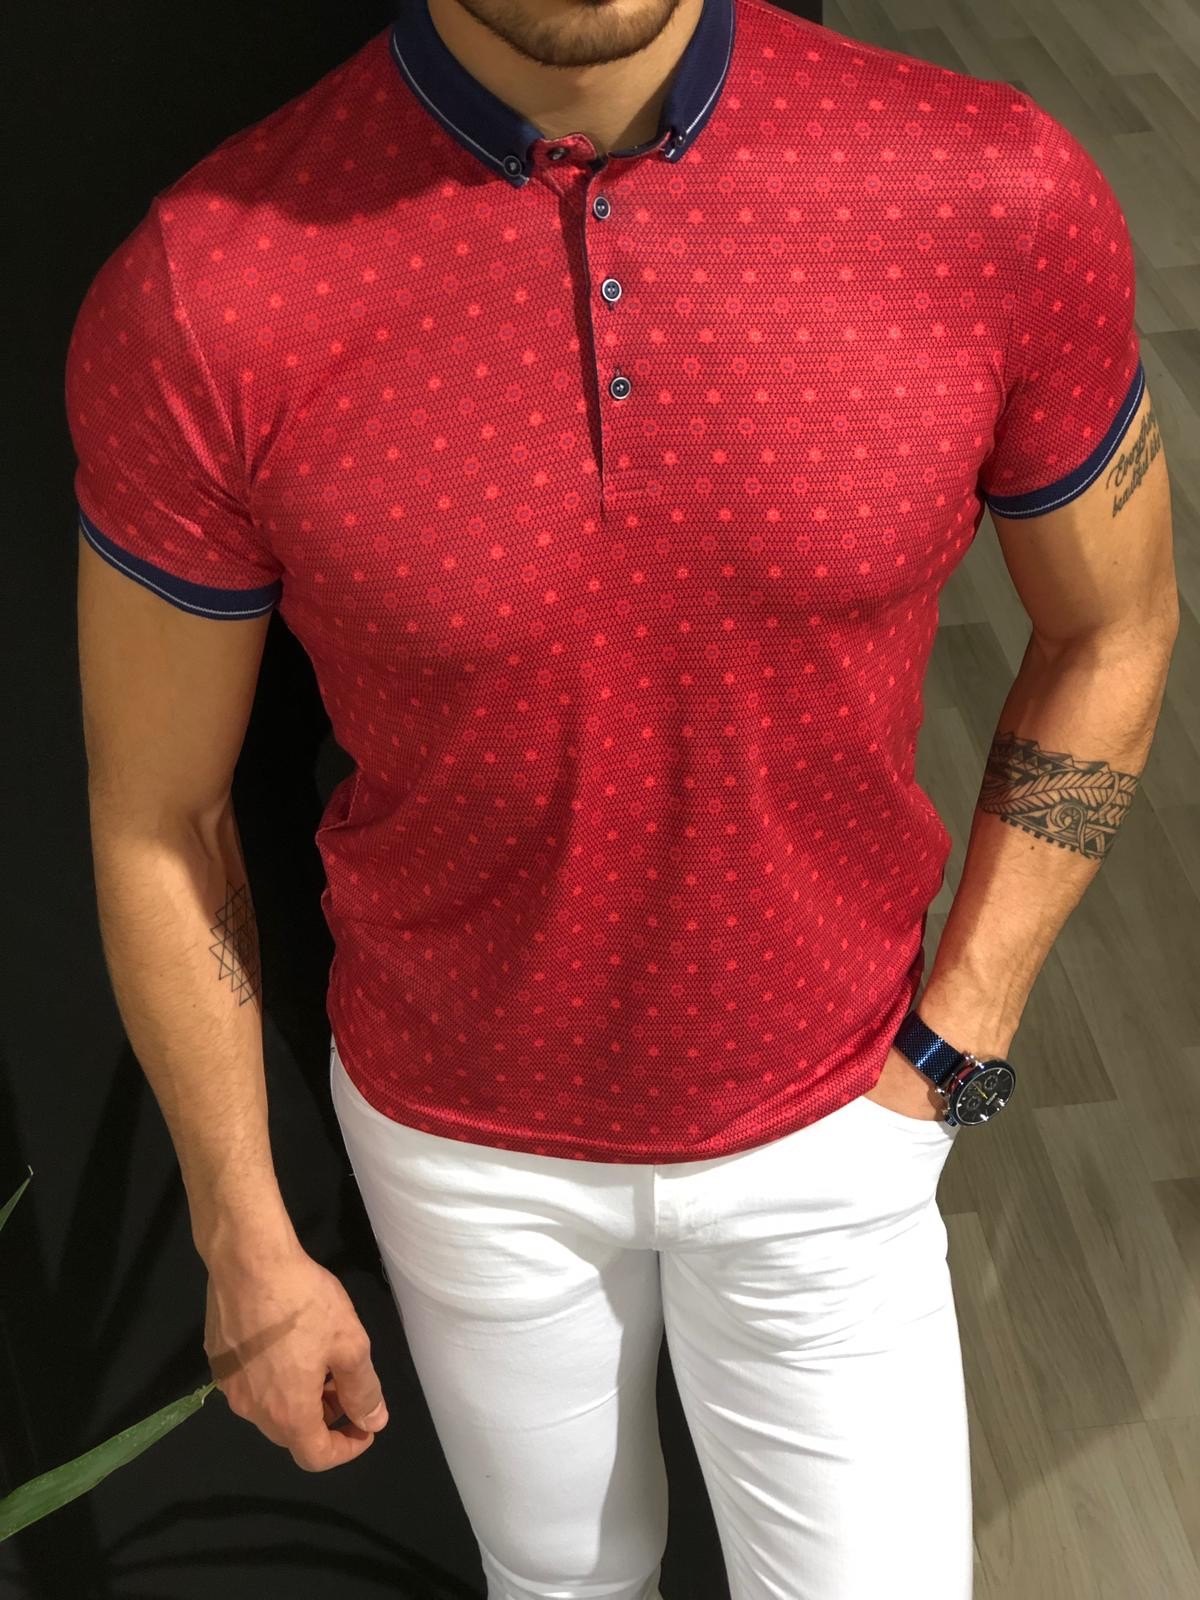 Buy Red Slim Fit Collar T-shirt by Gentwith.com with Free Shipping